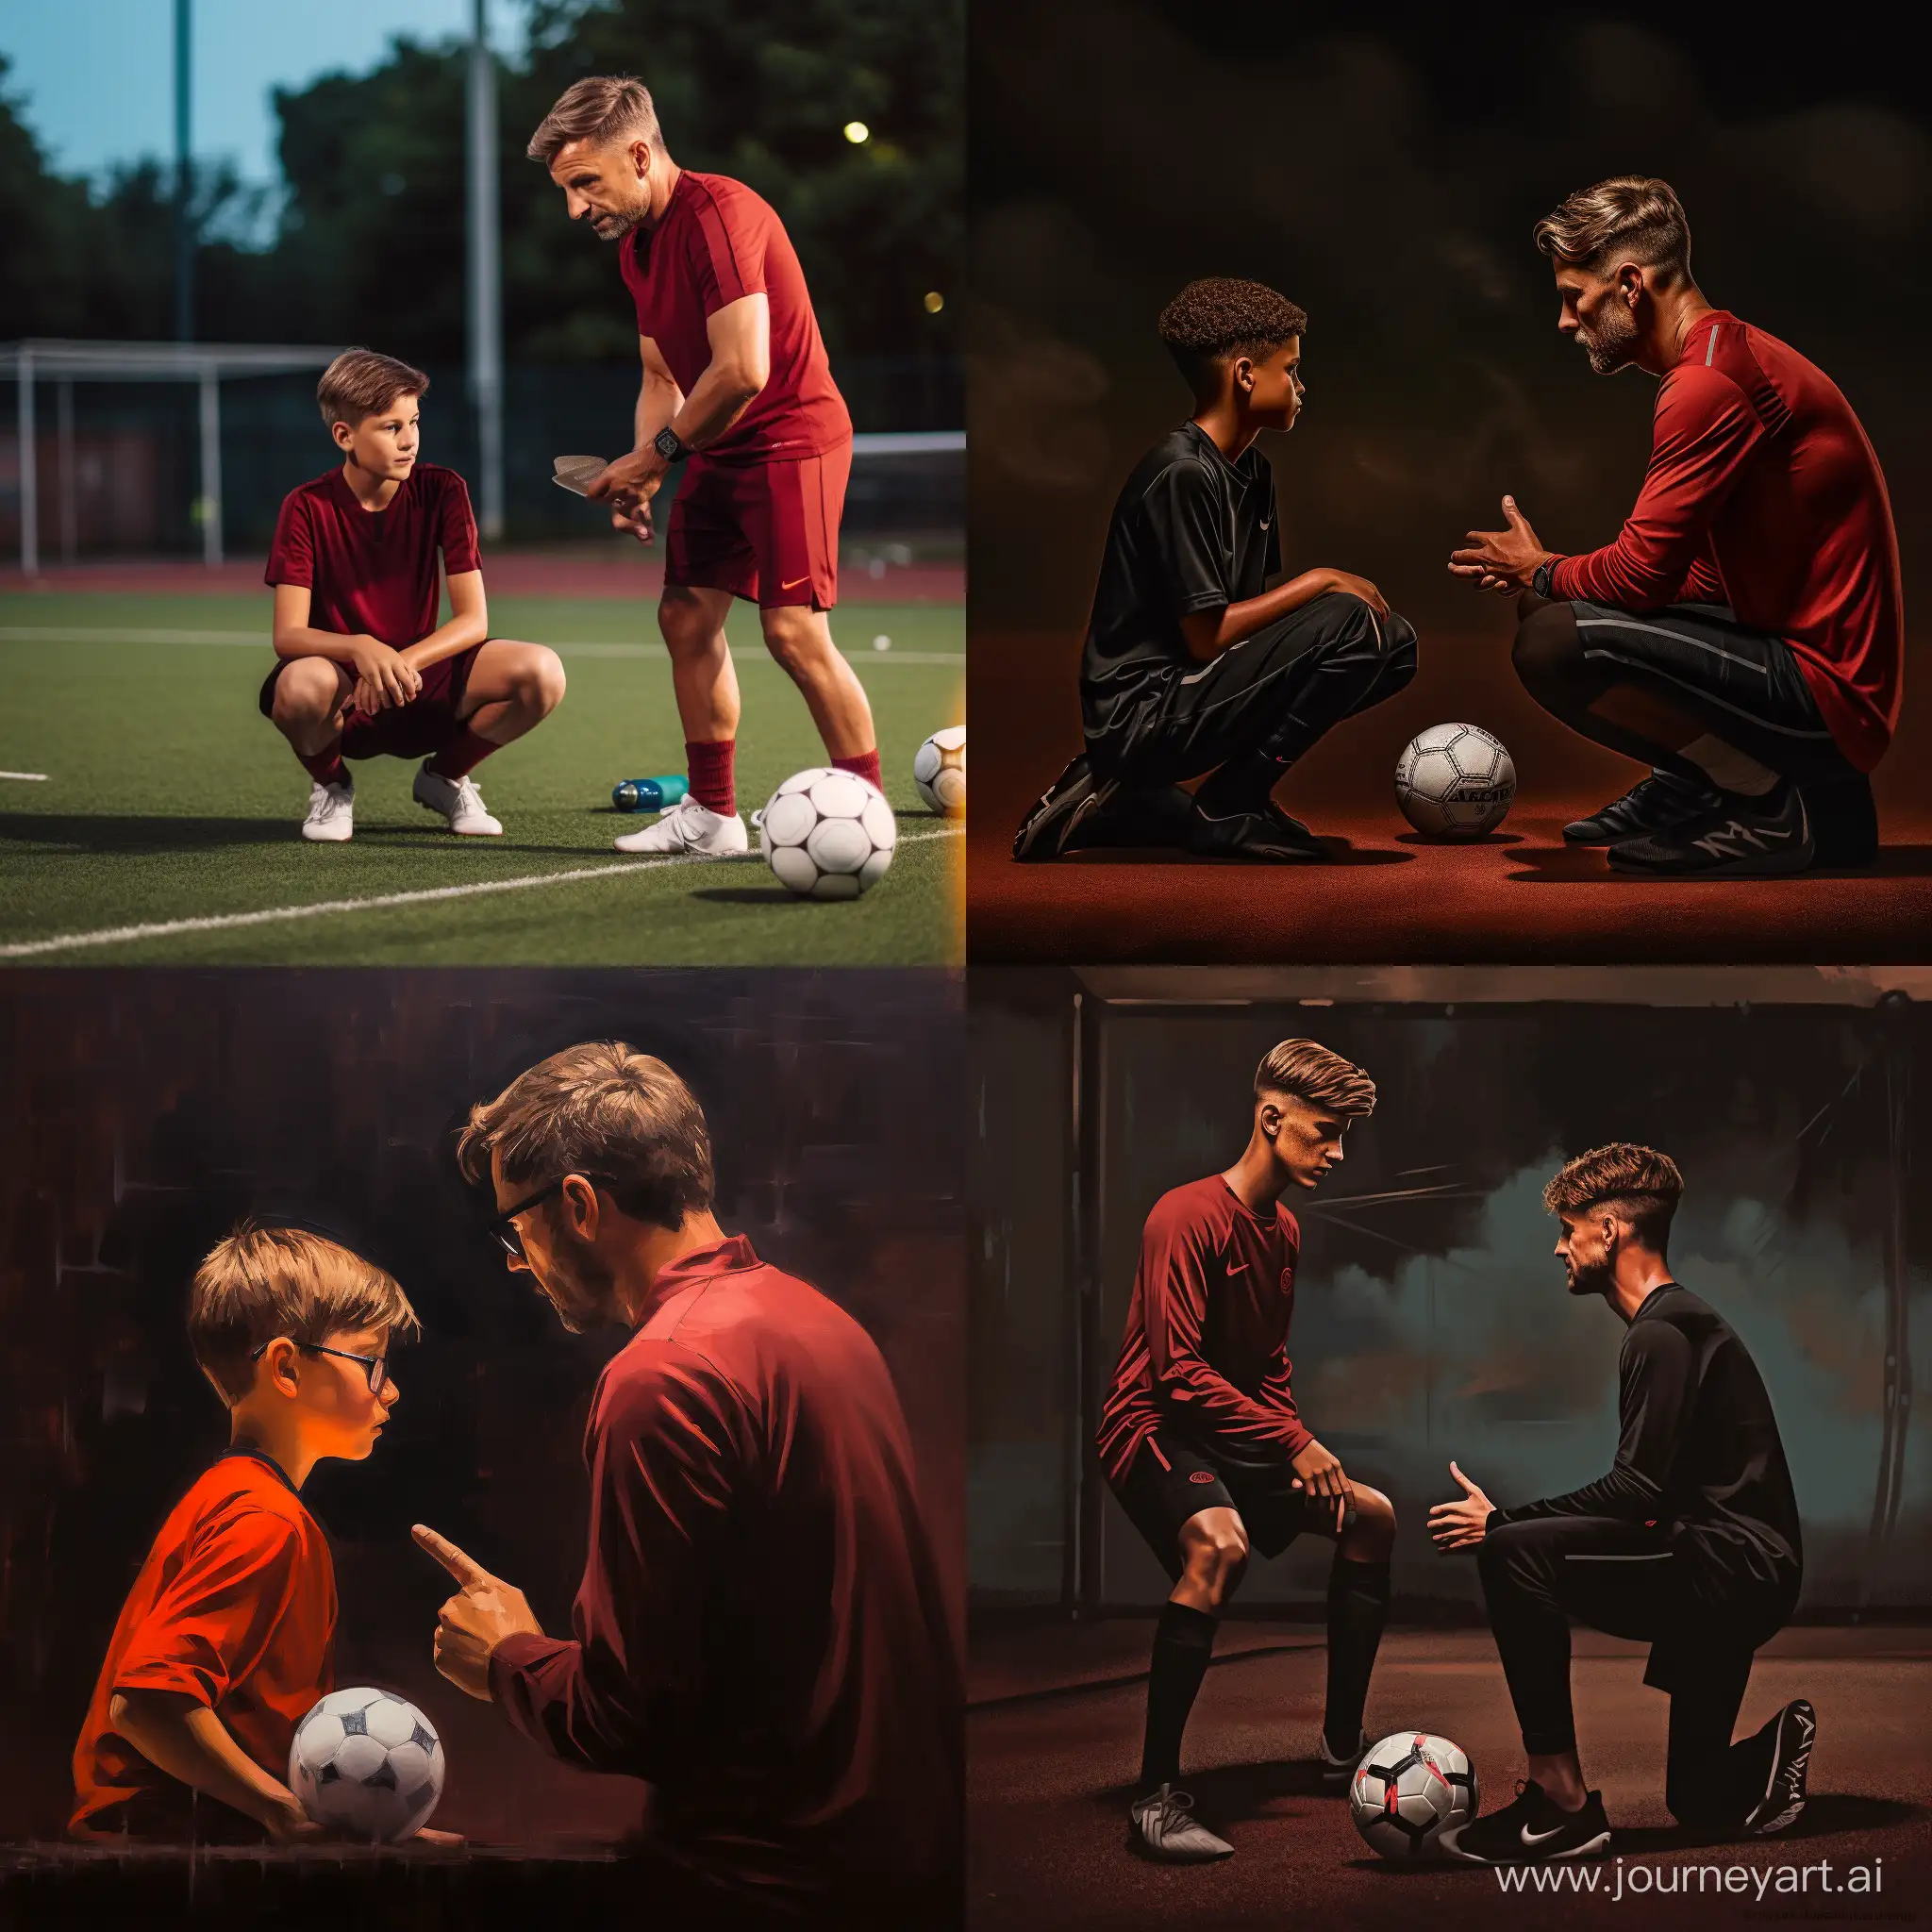 Personalized-Football-Coaching-Session-in-Striking-Dark-Red-Ambiance